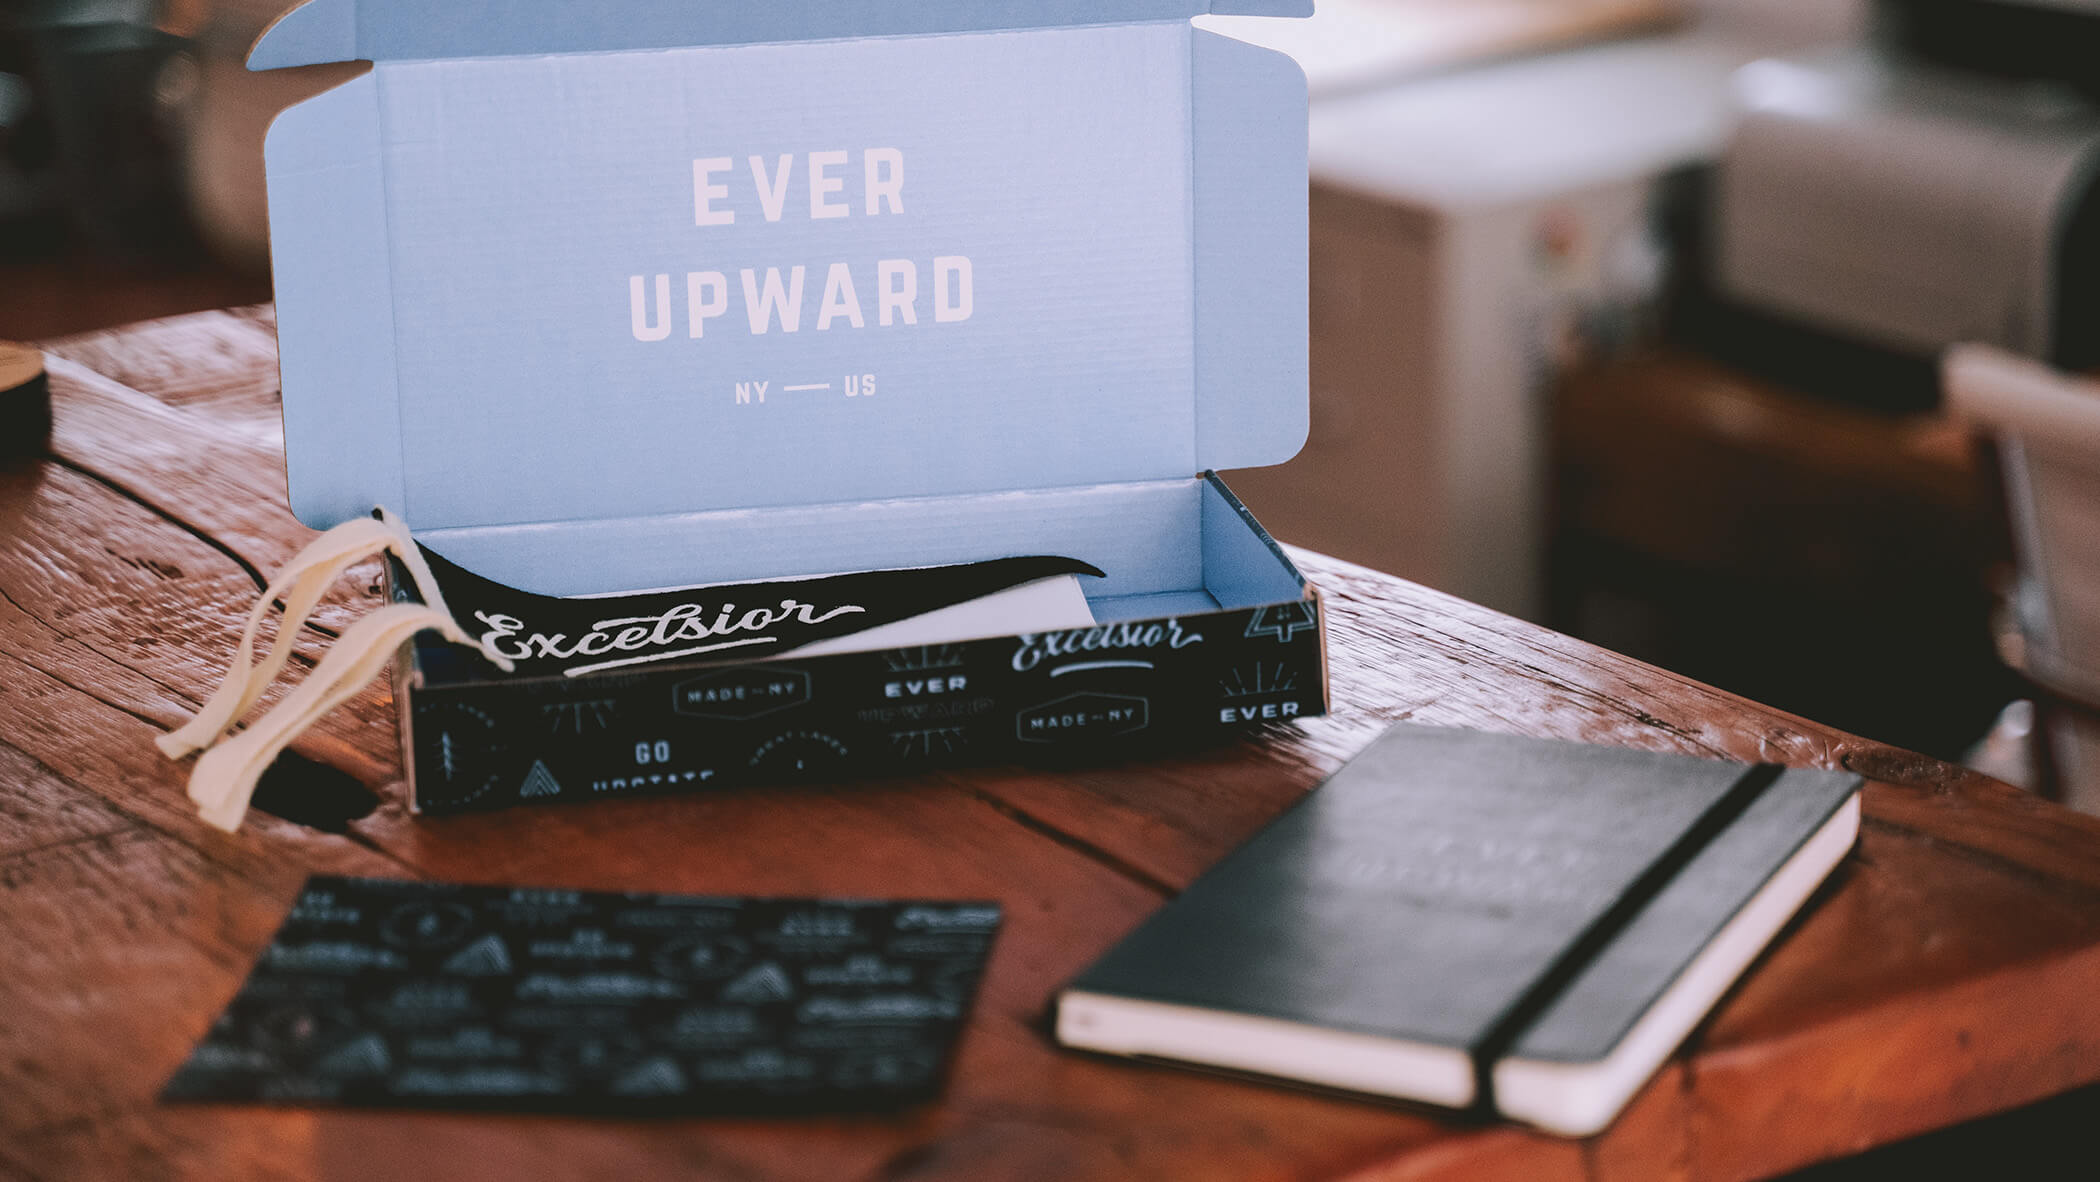 a box that says “Ever Upward” is open on a wooden table. Inside is a black pennant that reads “Excelsior”. On the table are two items: a black postcard with an Upstate NY graphic pattern, and a moleskine notebook that’s embossed to read “Ever Upward”.